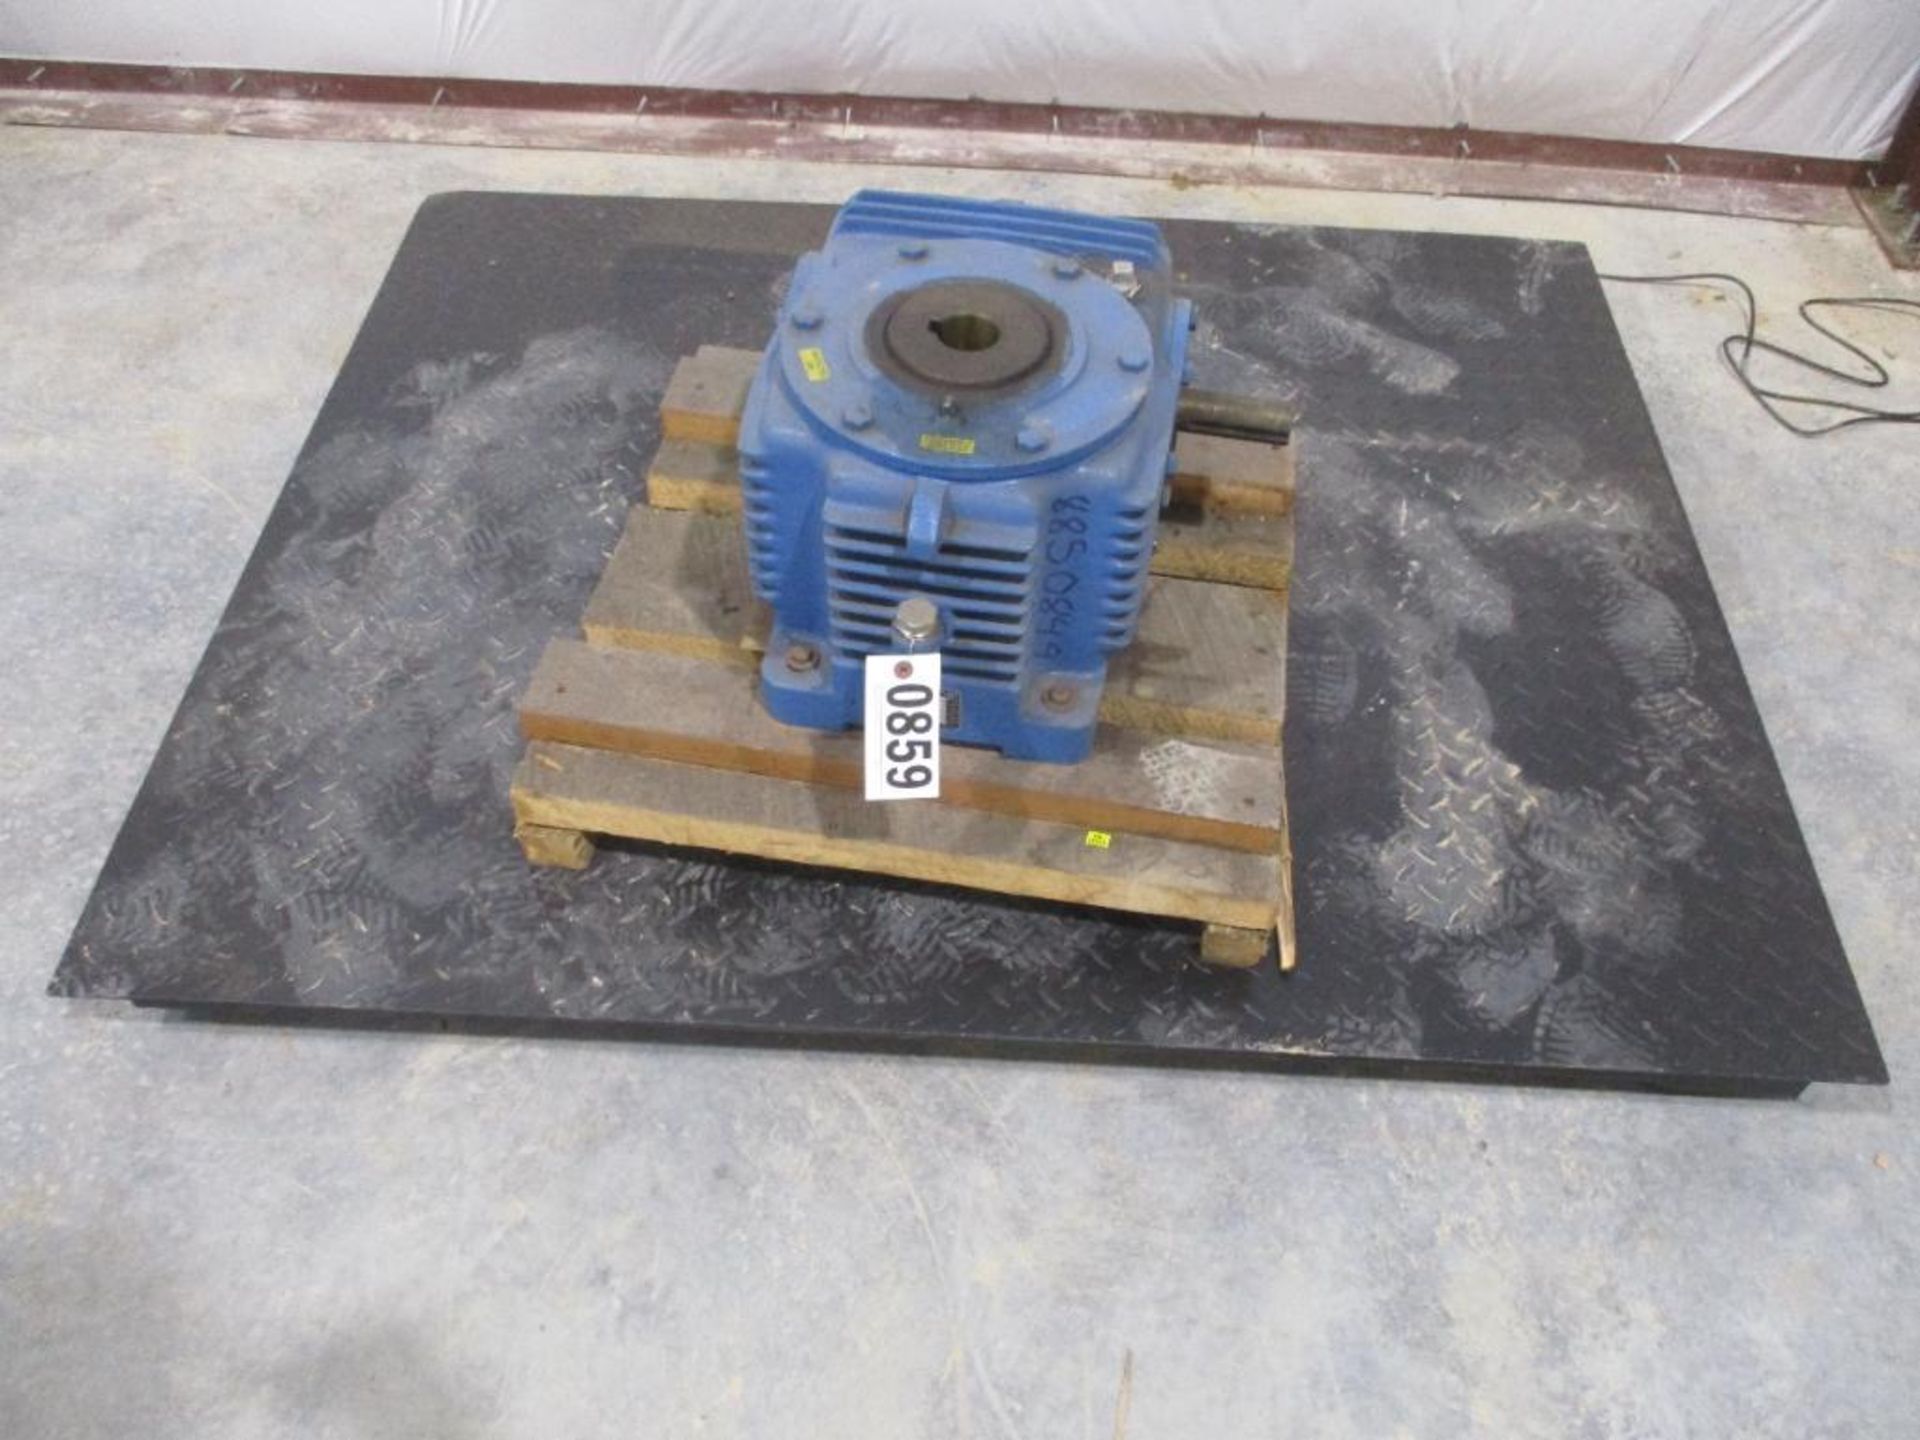 TEXTON 4-1 RATIO REDUCER P/N SHV50A830-8B , 331# lbs (There will be a $40 Rigging/Prep fee added to